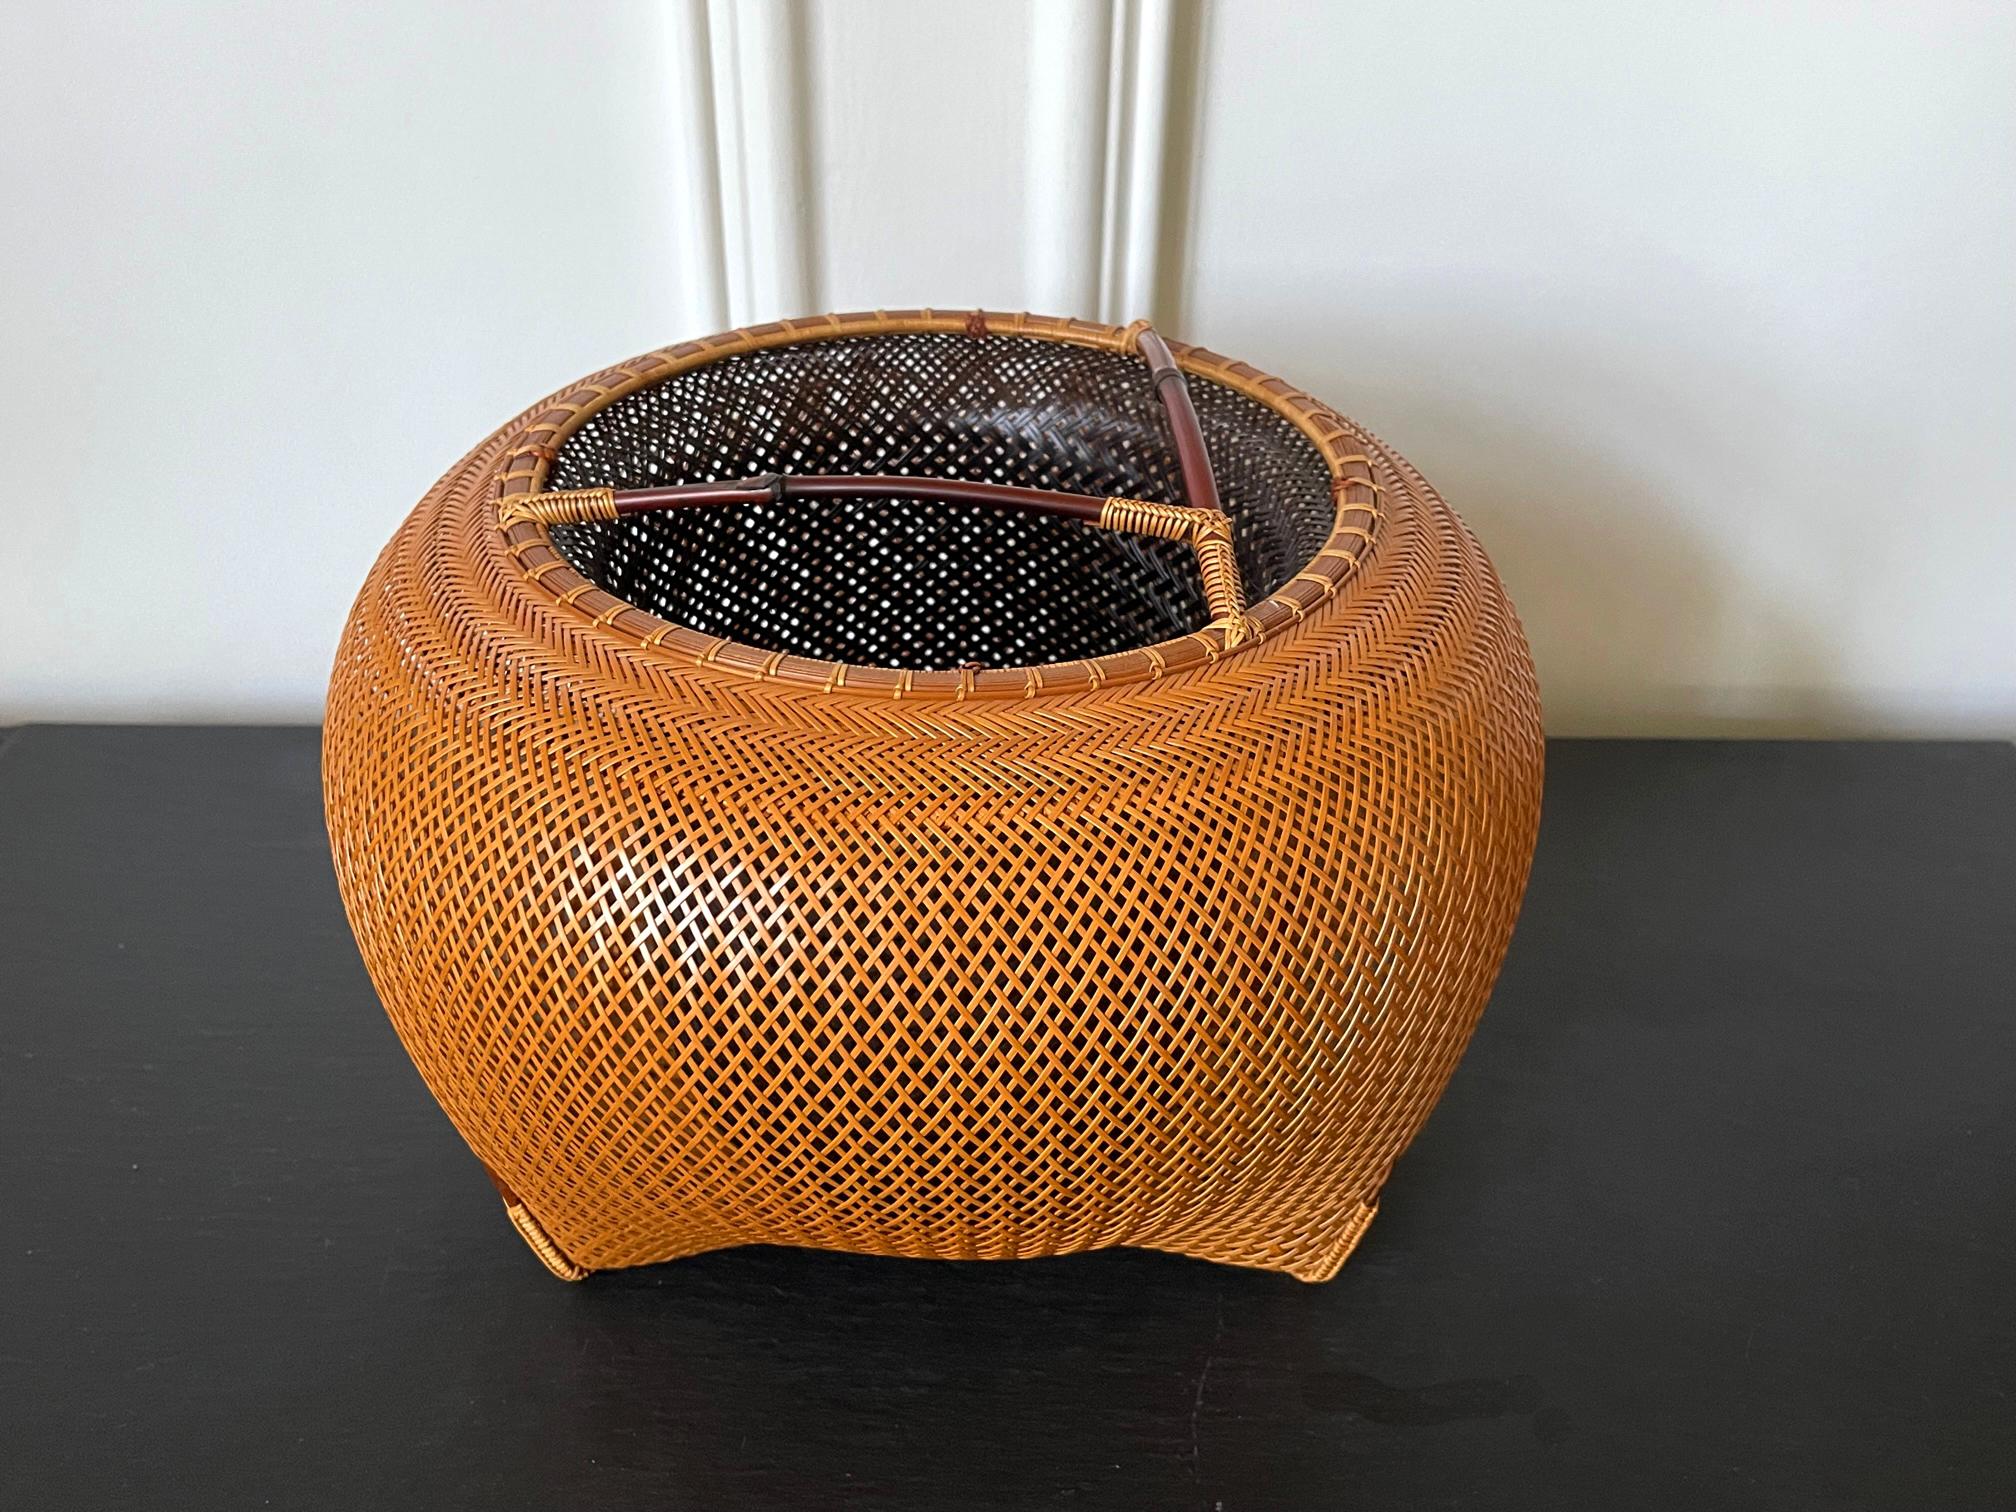 A beautiful bamboo sculpture in a double-walled basket form by contemporary Japanese bamboo artist Kawano Shoko (born 1957-). The piece entitled 